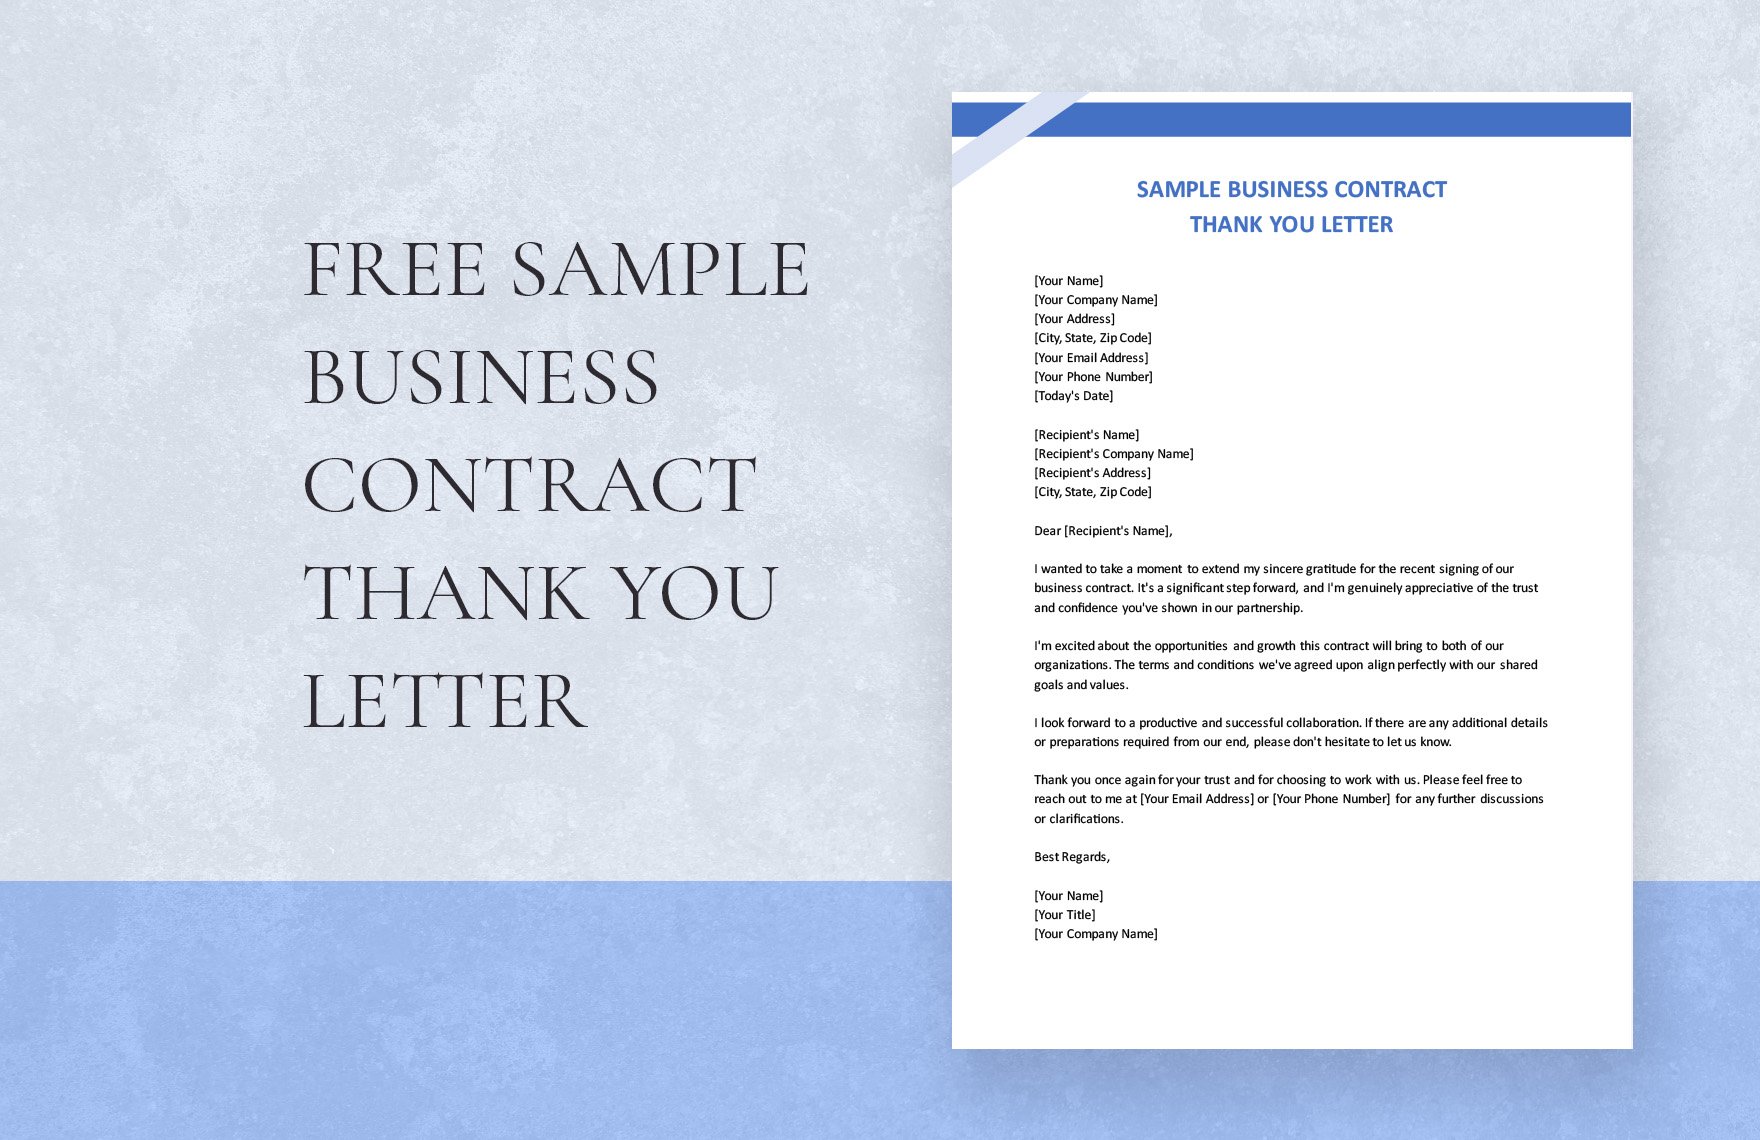 Sample Business Contract Thank You Letter Template